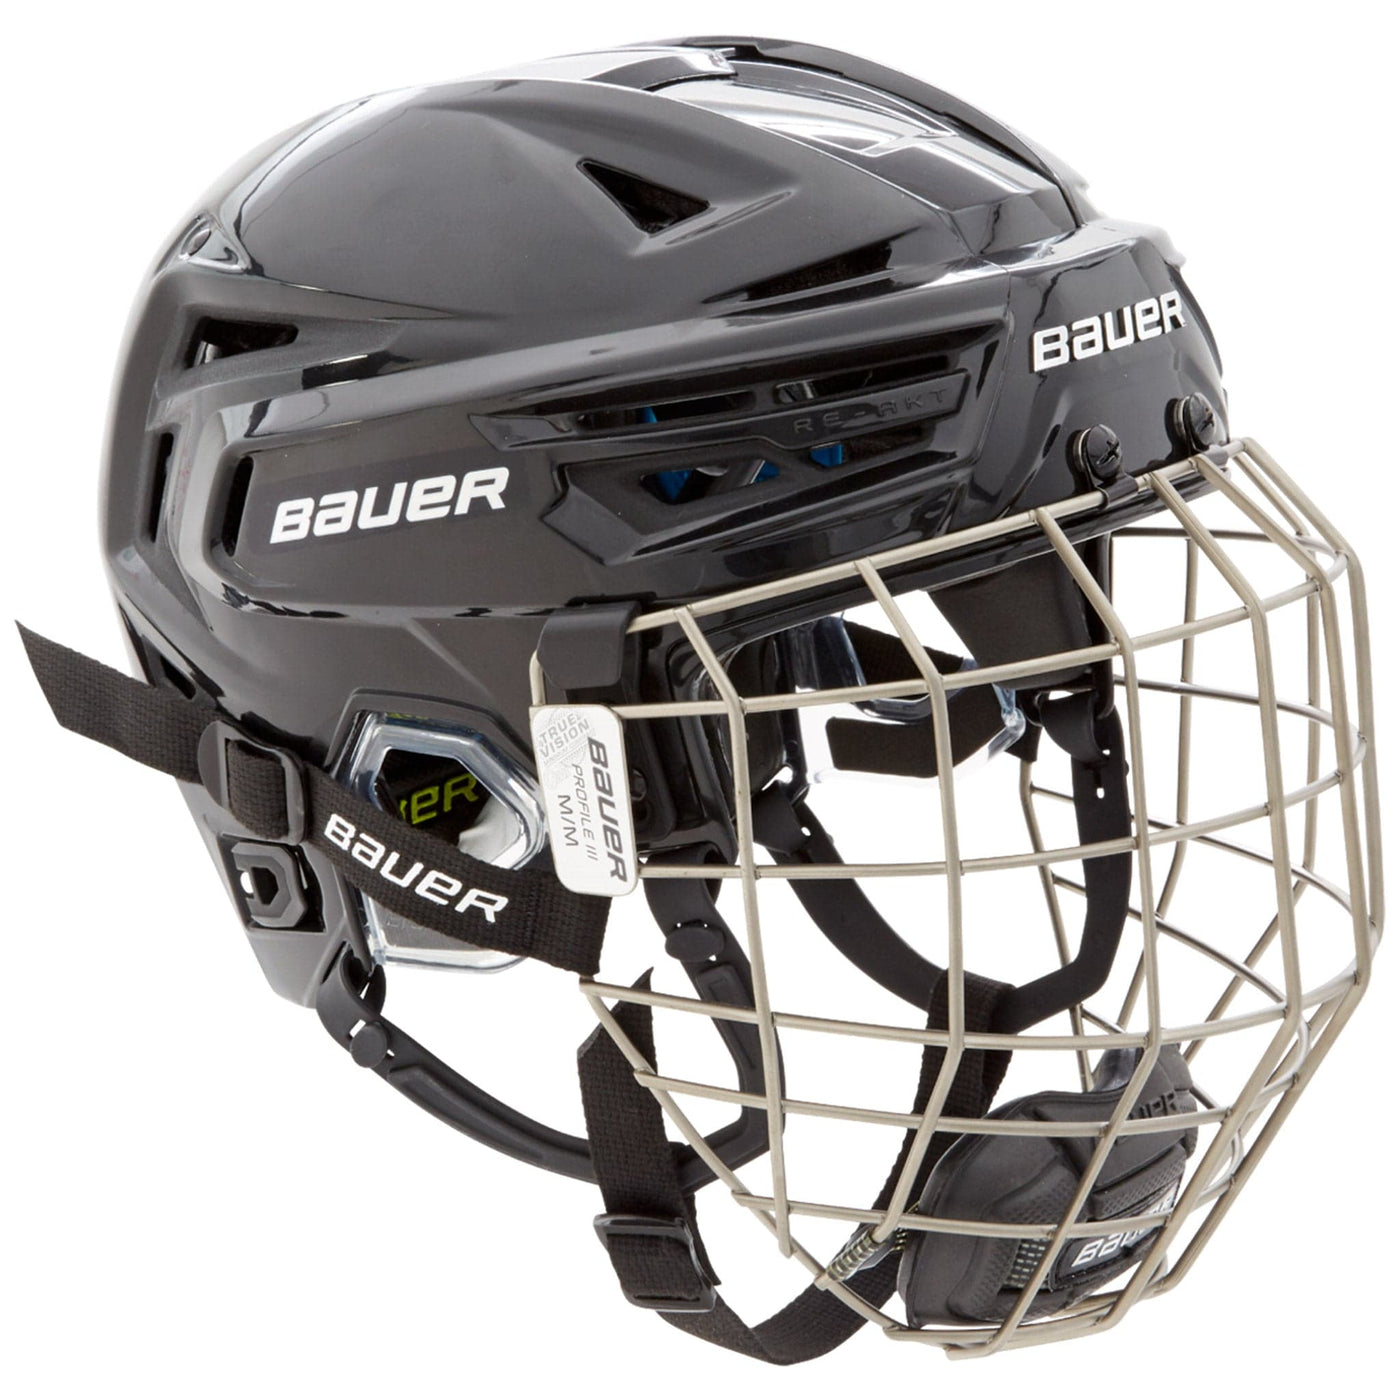 Bauer RE-AKT 150 Hockey Helmet / Cage Combo - The Hockey Shop Source For Sports